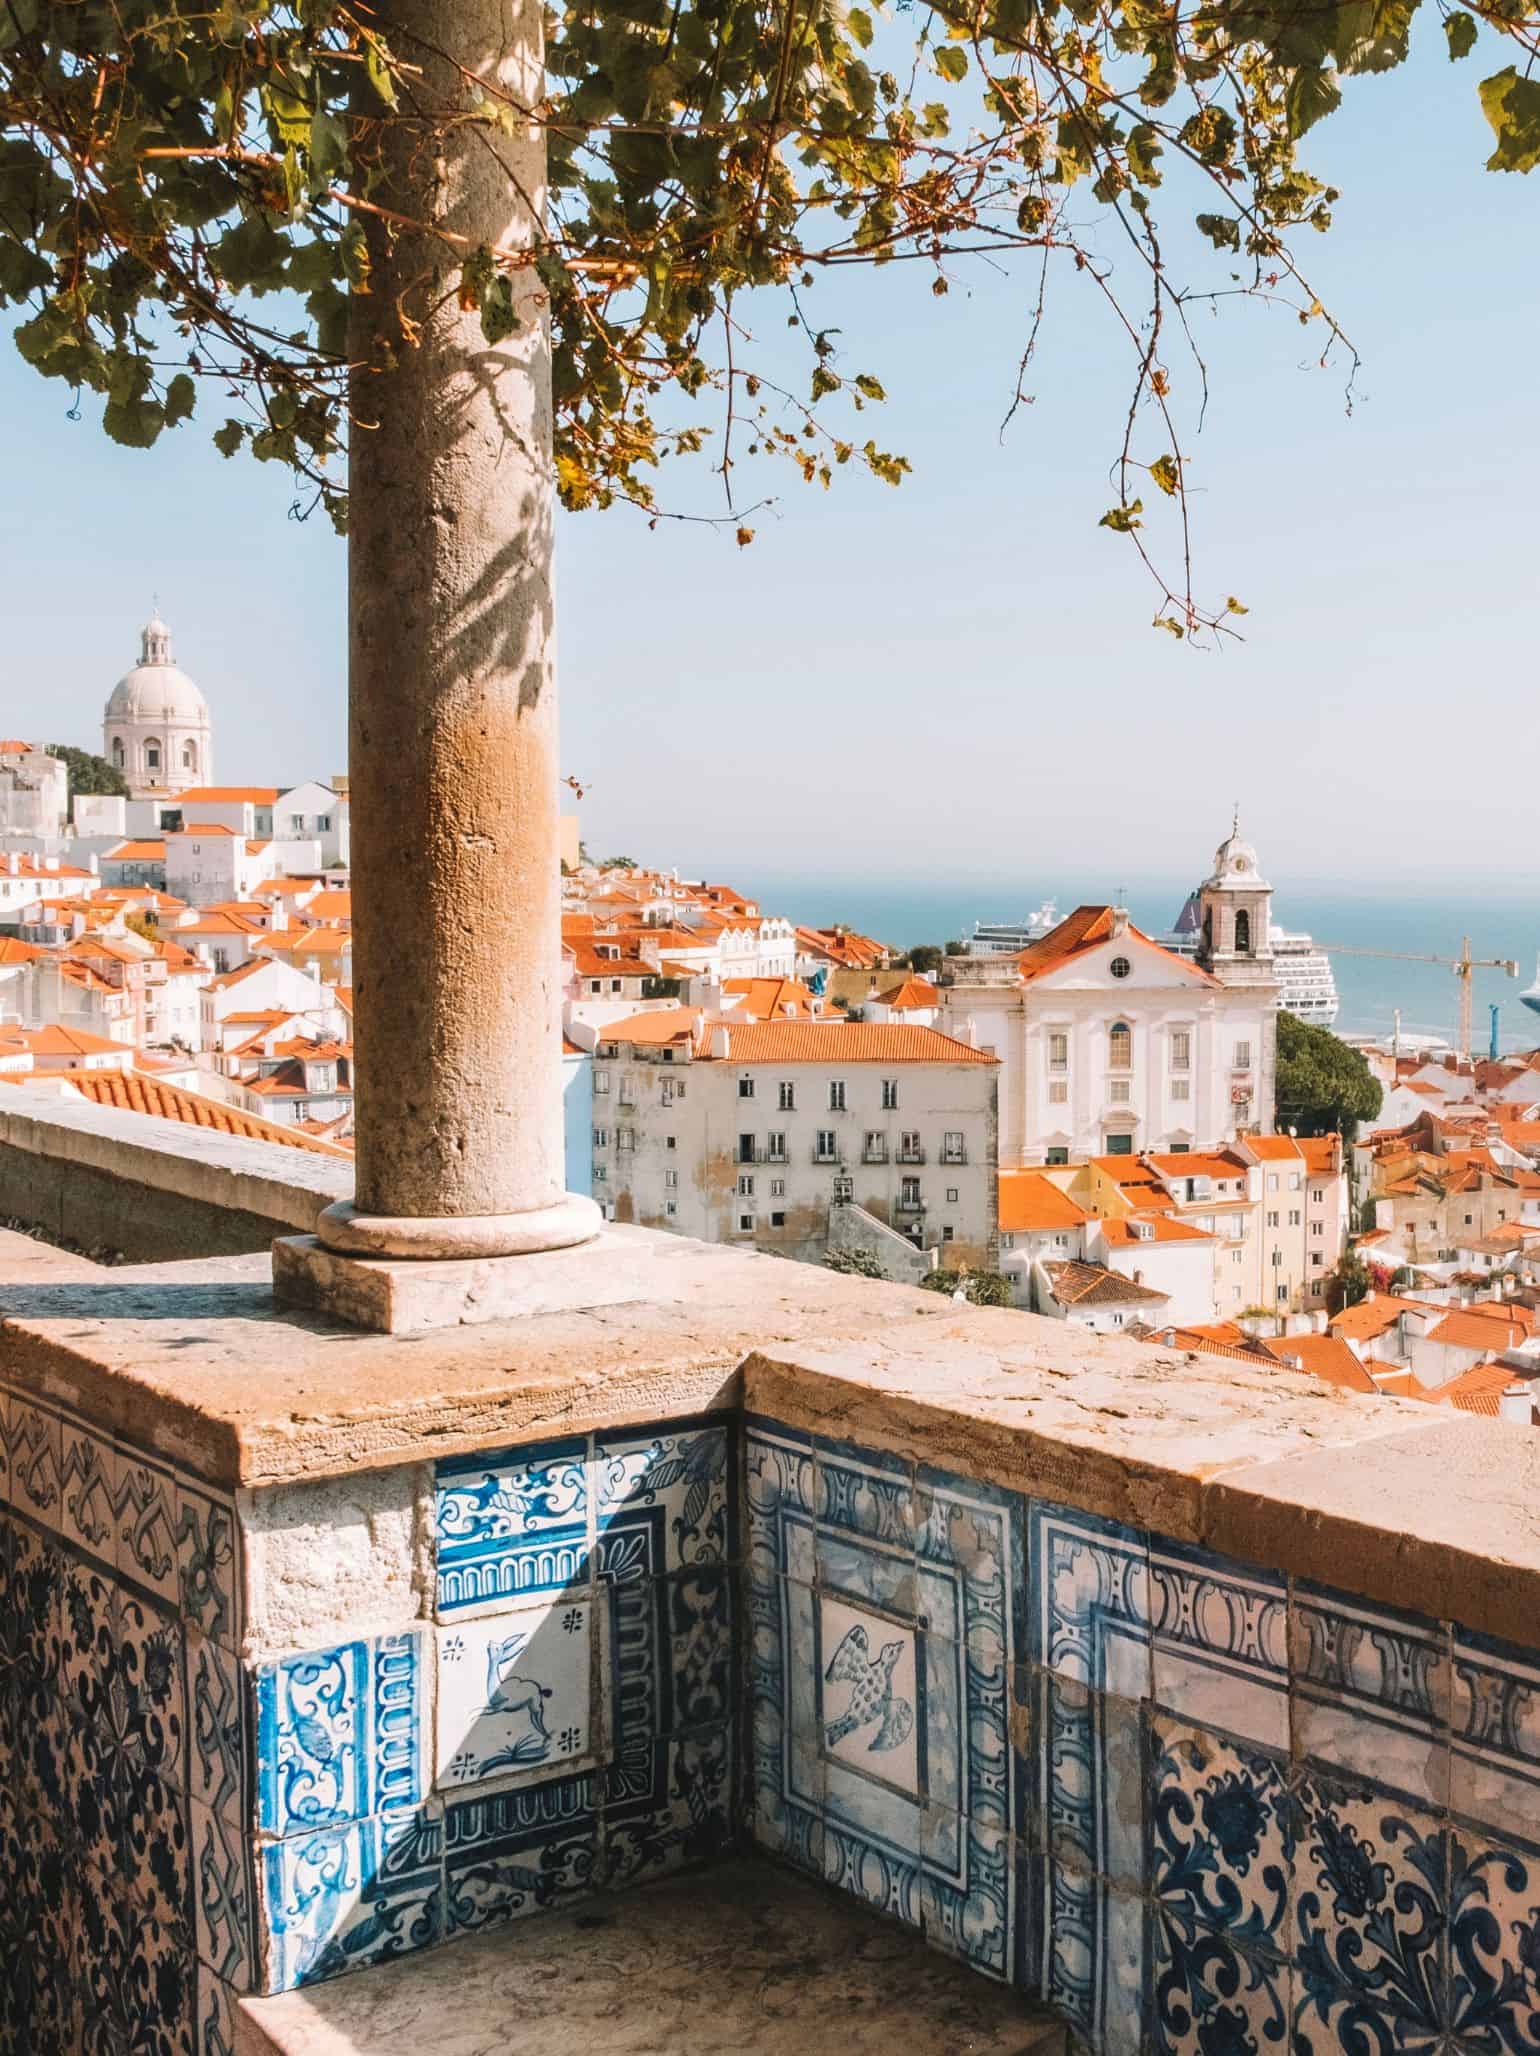 Views from the Miradouro de Santa Luzia, one of the best viewpoints in Alfama. 